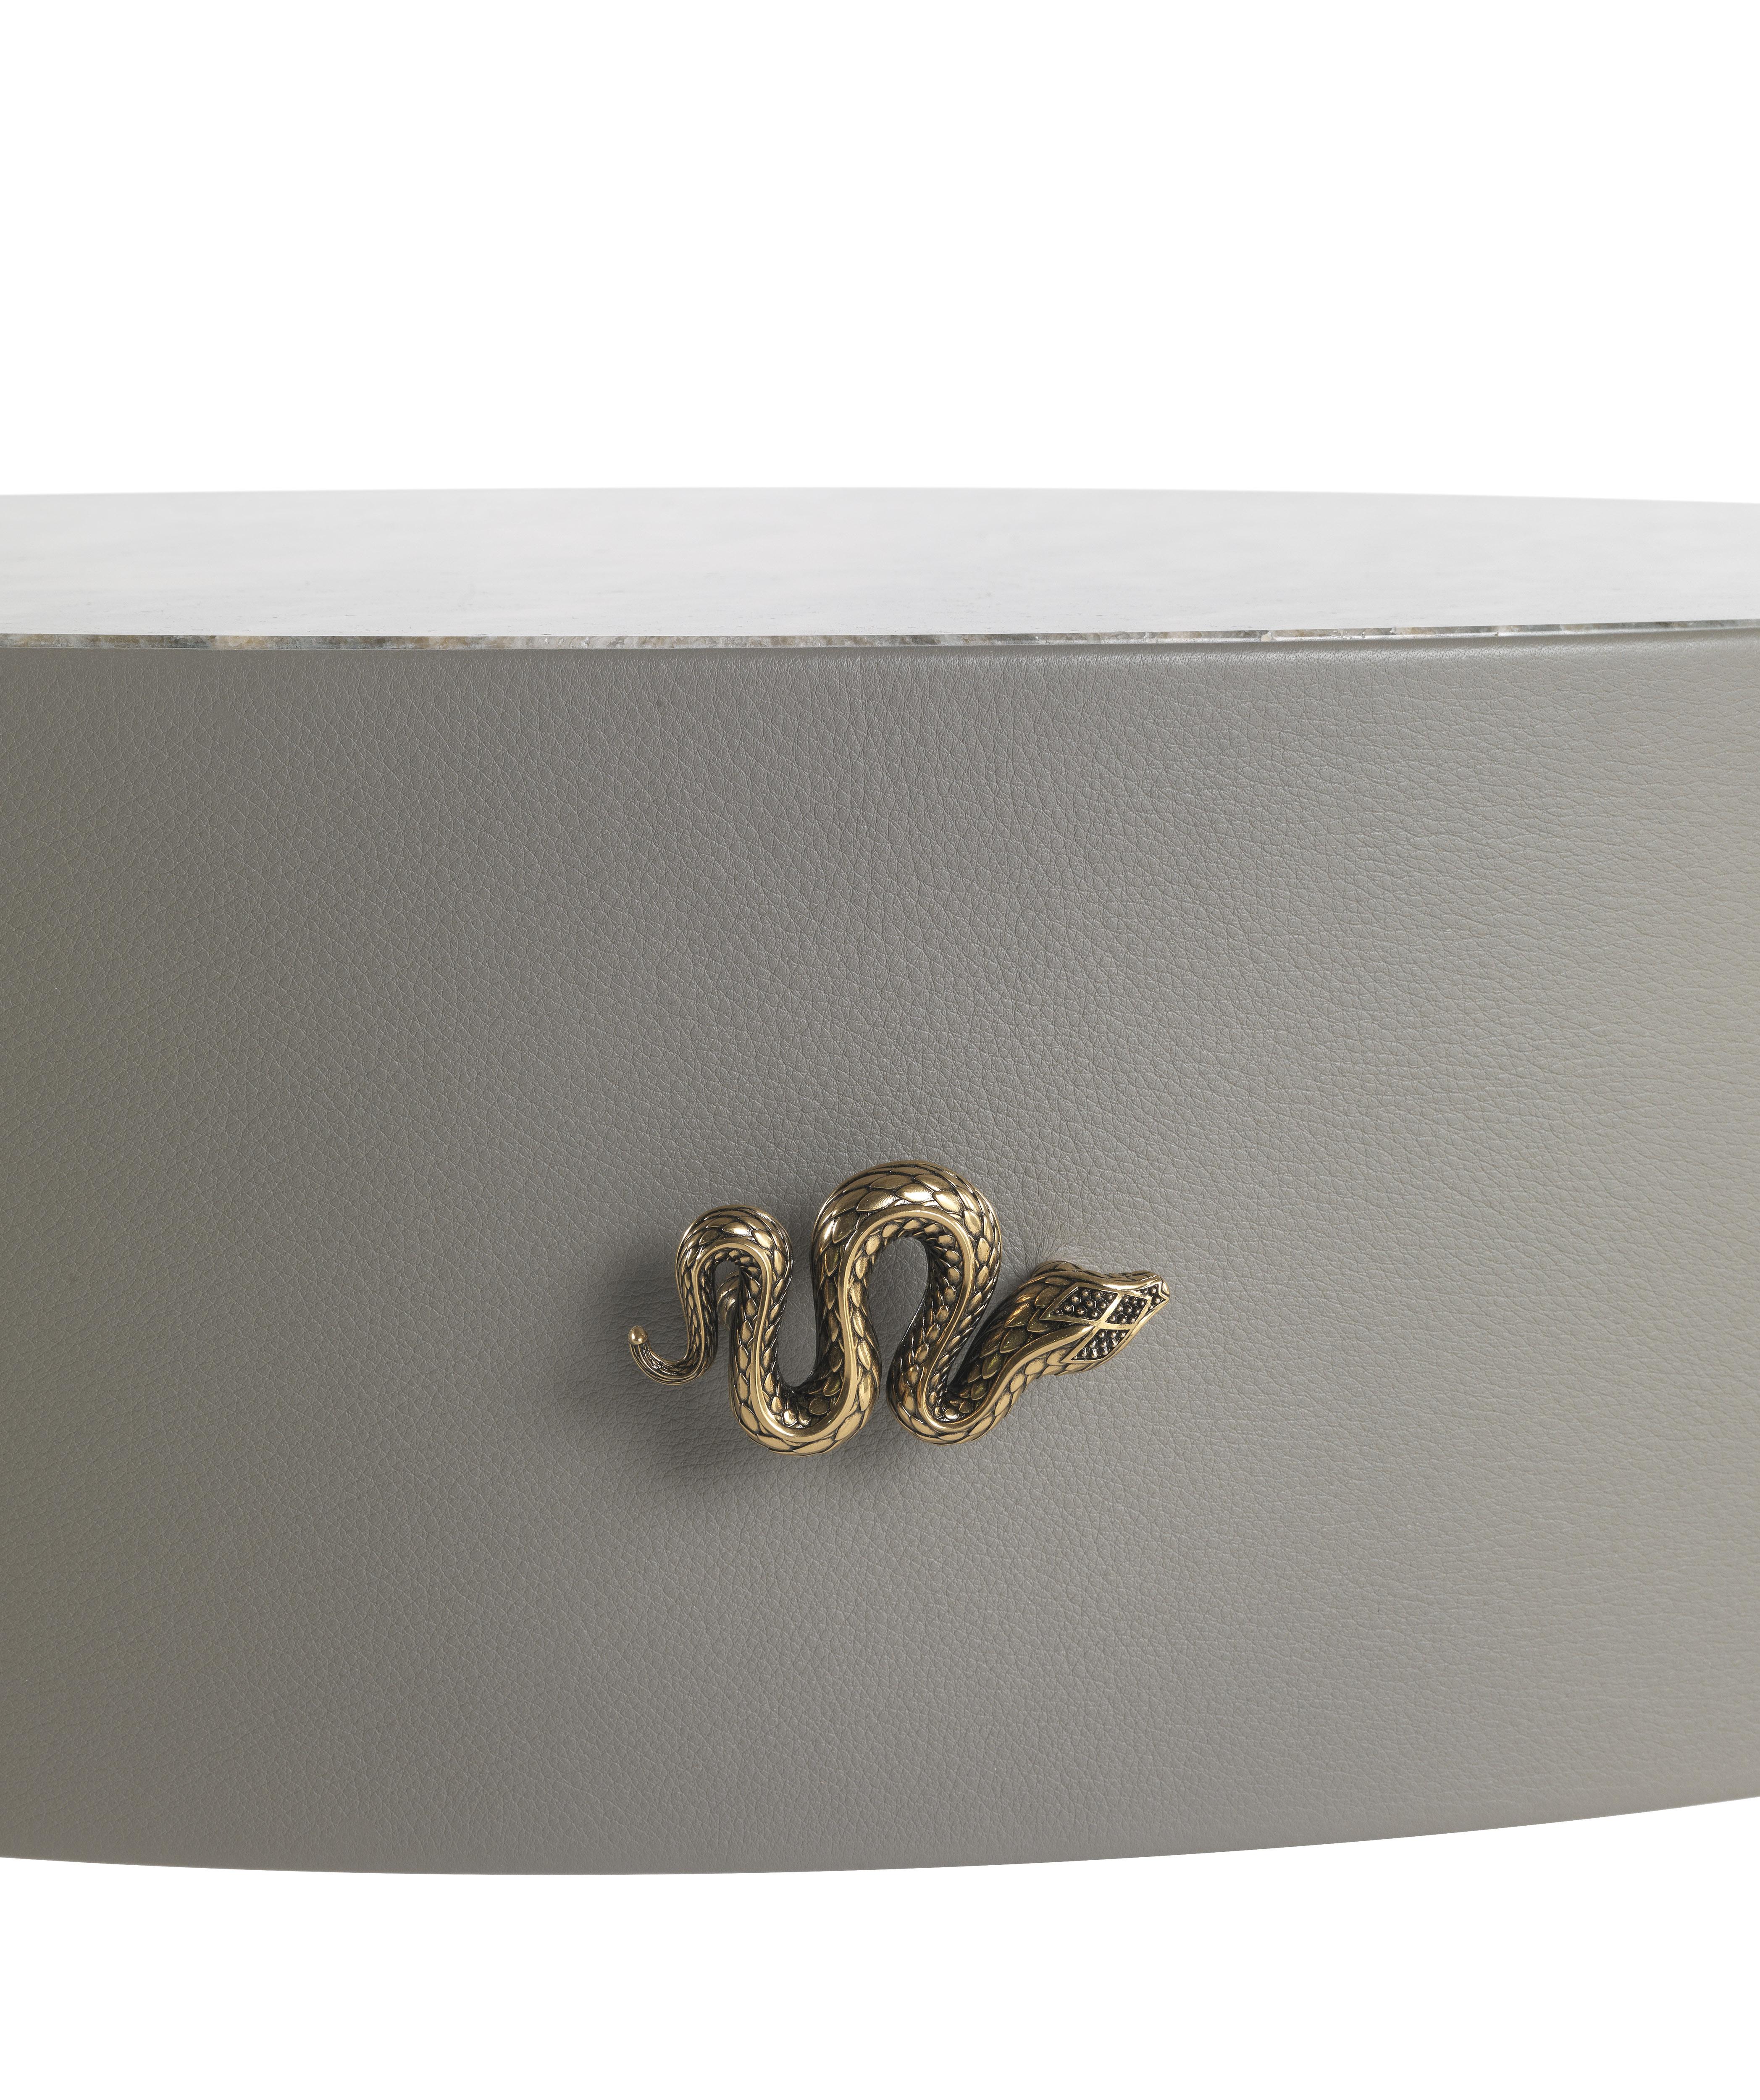 Trinidad Night table with structure in multi-layer wood covered with leather CAT. B touch COL. Ashgrey, top in marble CAT. A Bianco Carrara, legs in glossy gold finishing. “Jewel handles” and RC logo in cast brass available in gold finishing.